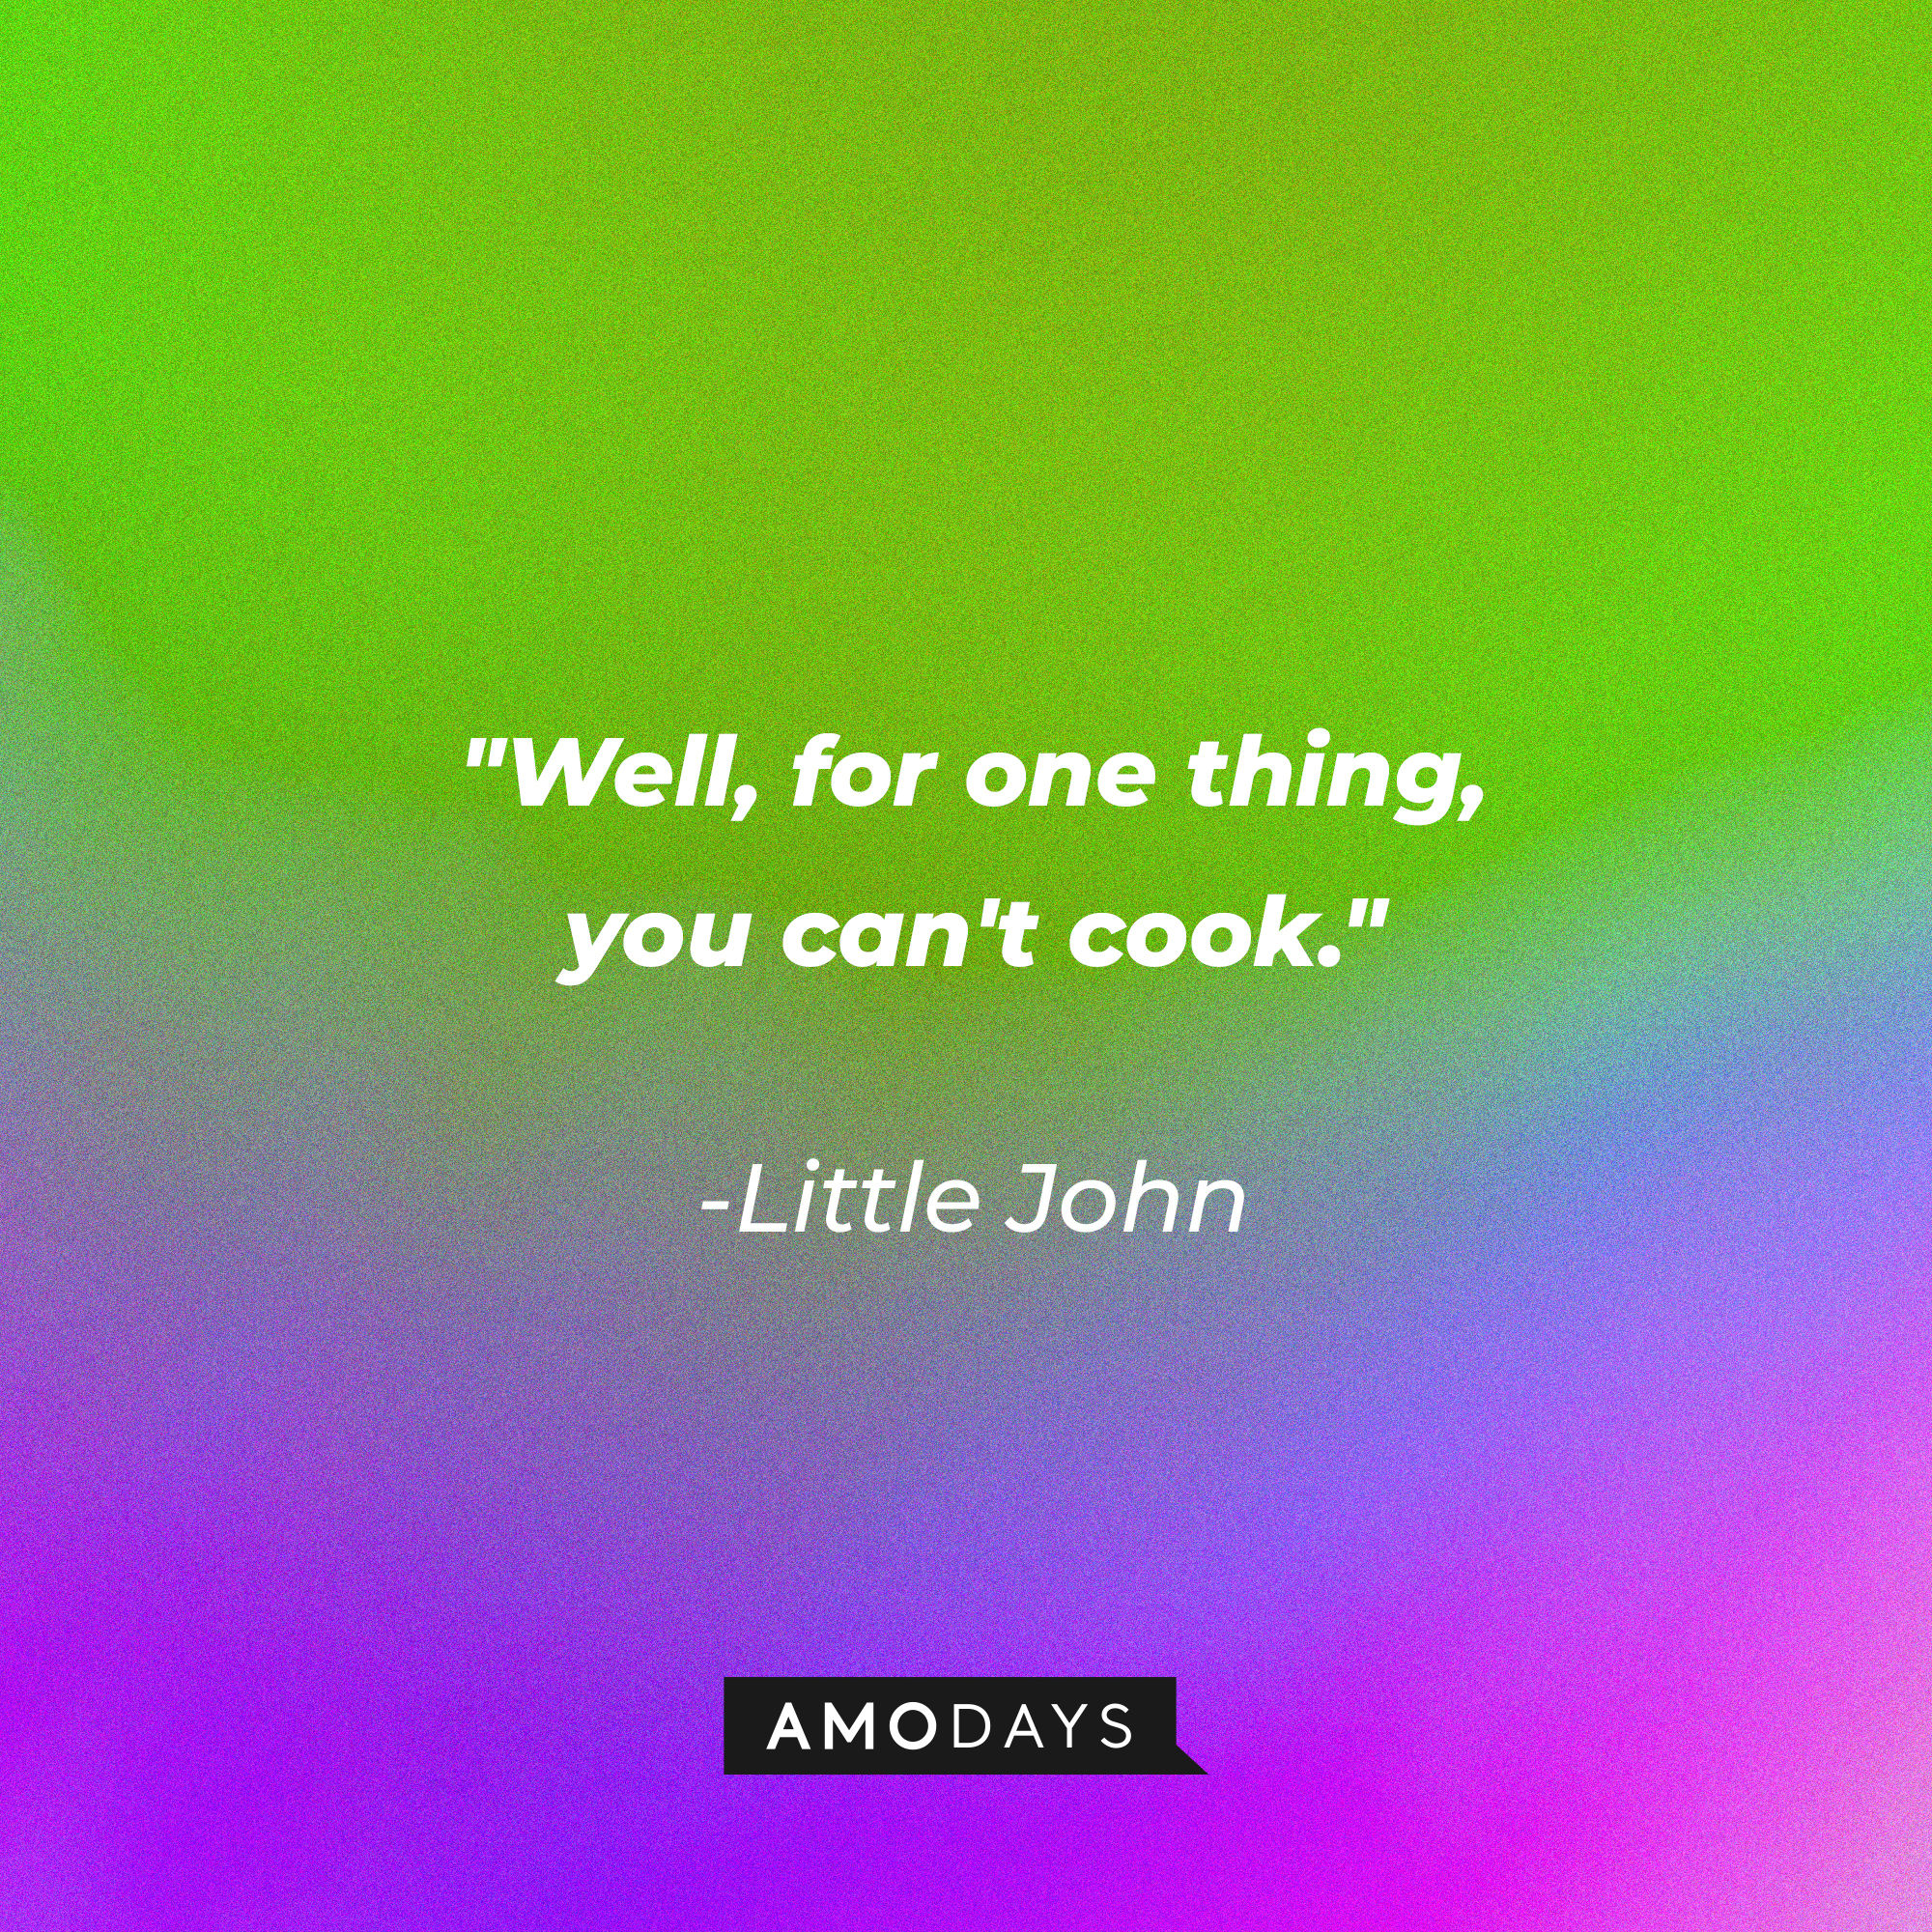 Little John's quote: "Well, for one thing, you can't cook." | Source: Amodays